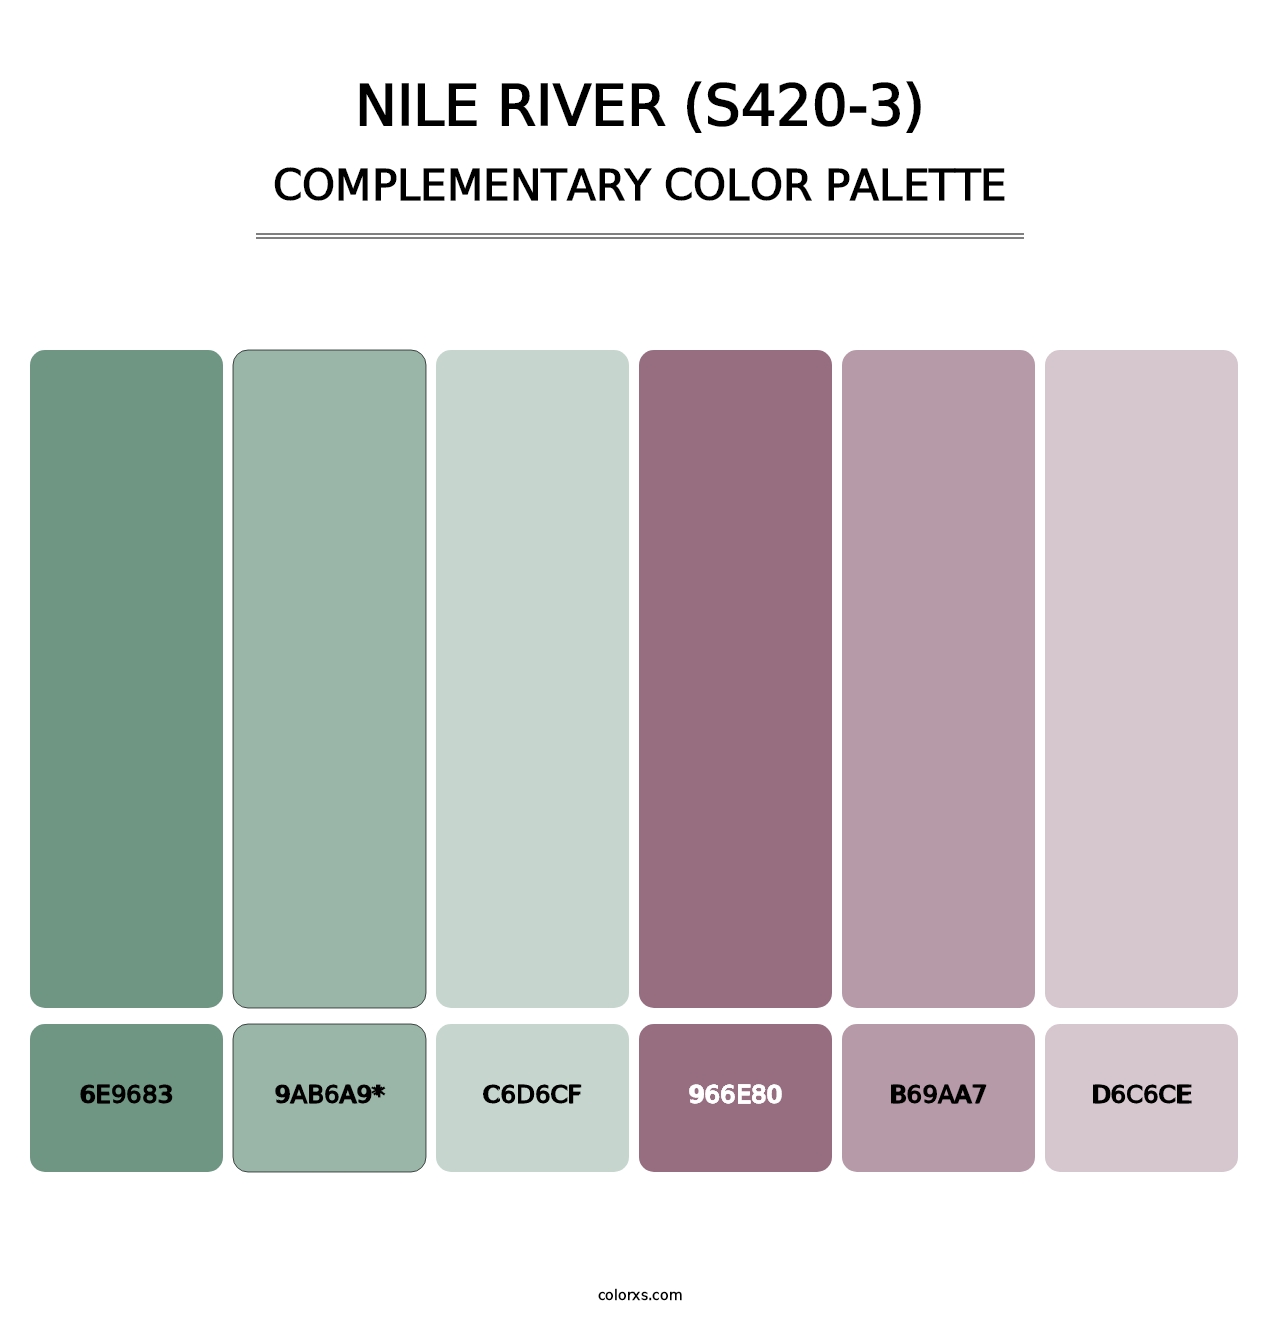 Nile River (S420-3) - Complementary Color Palette